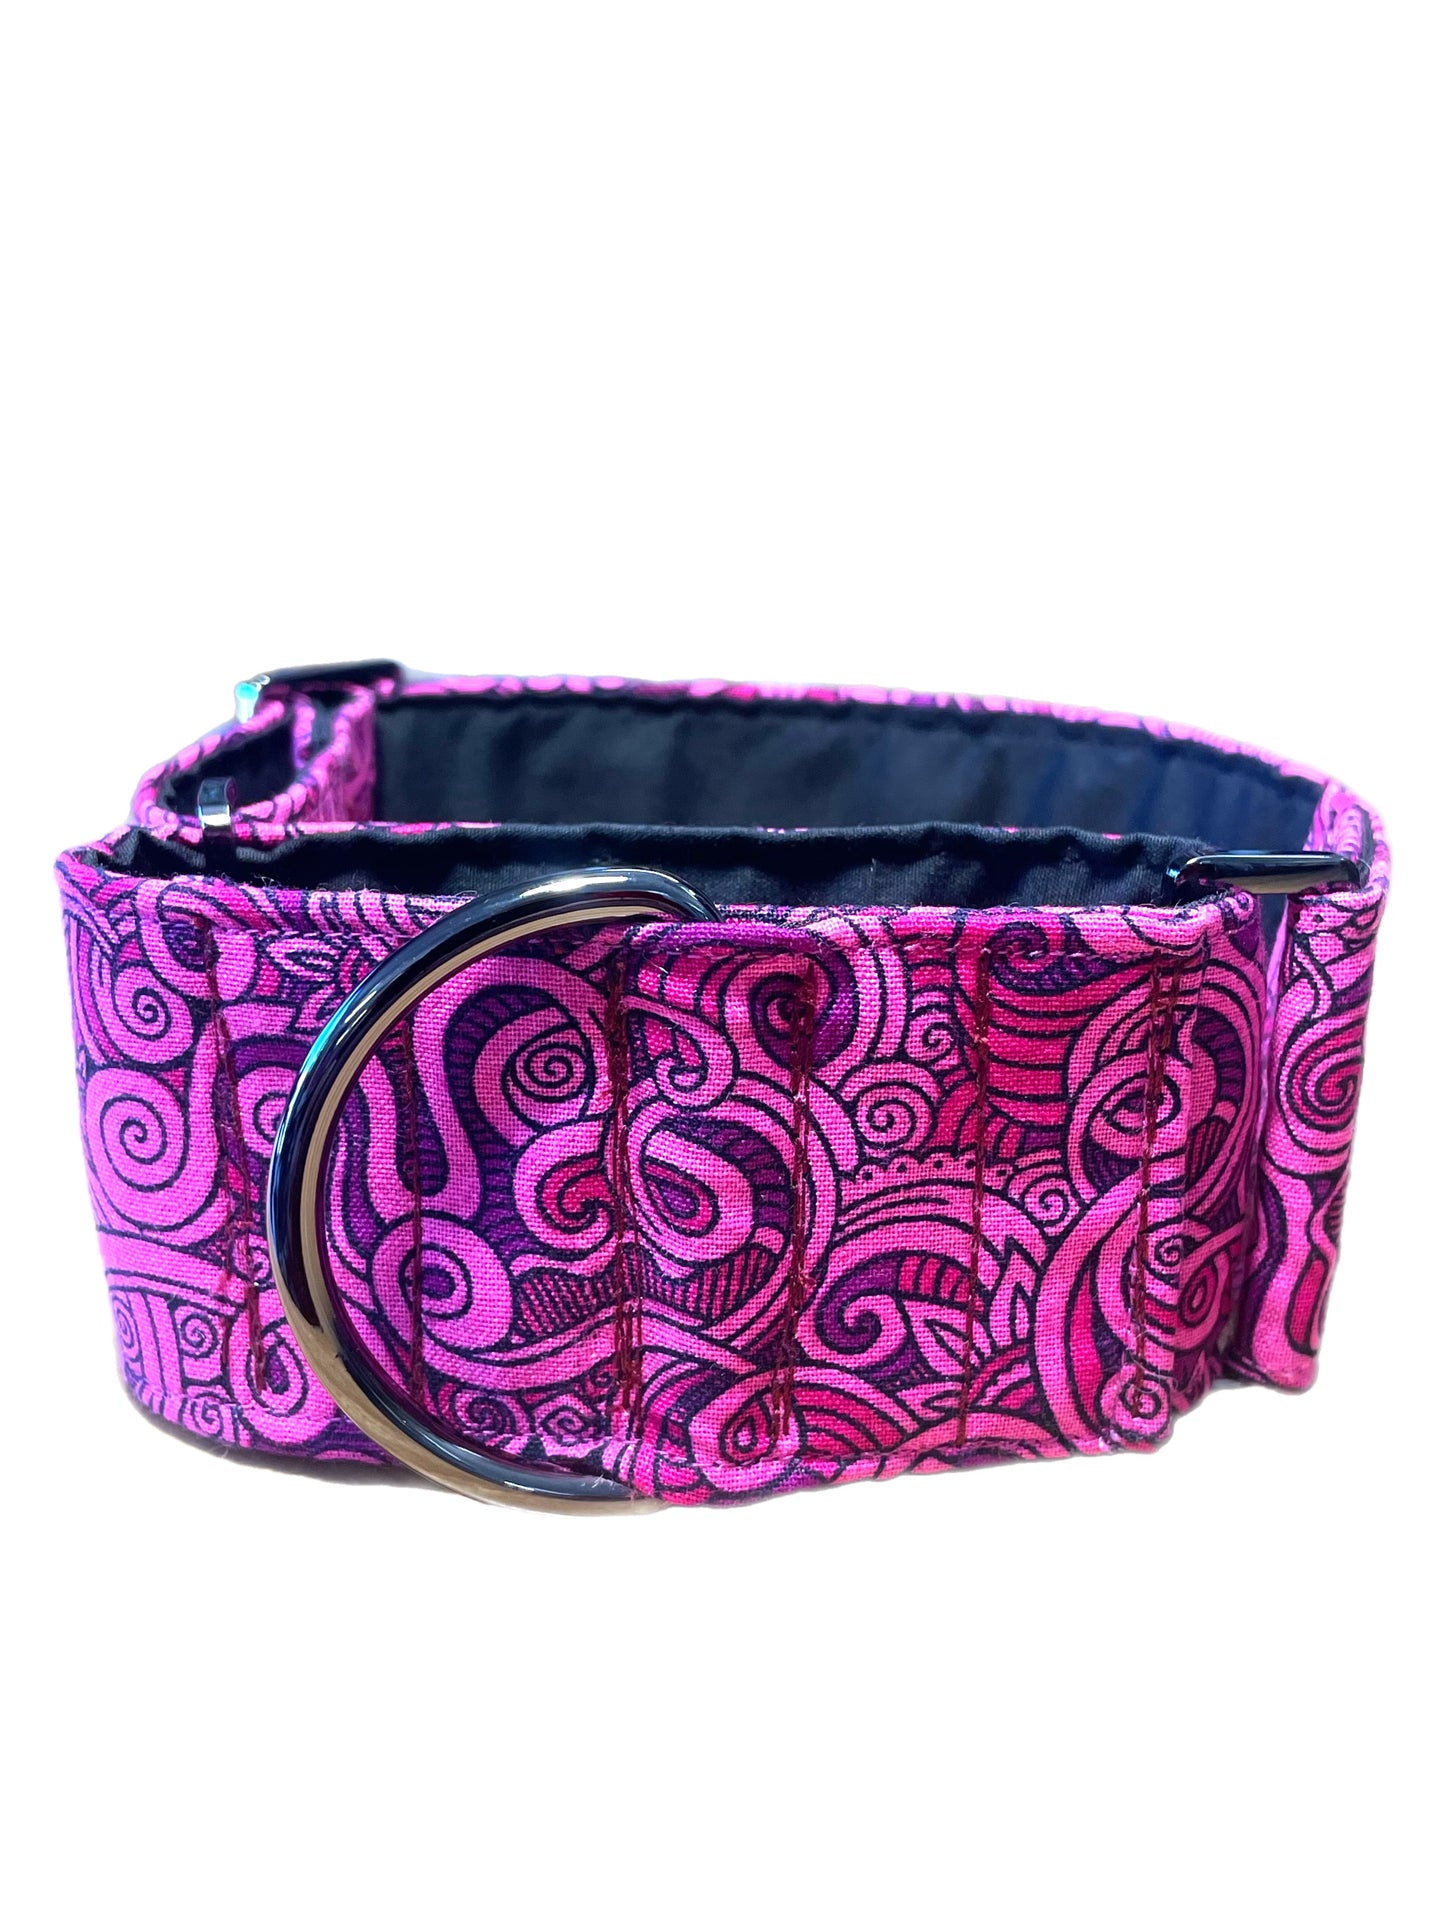 A beautiful paisley design greyhound whippet wide Martingale collar cotton covered super soft